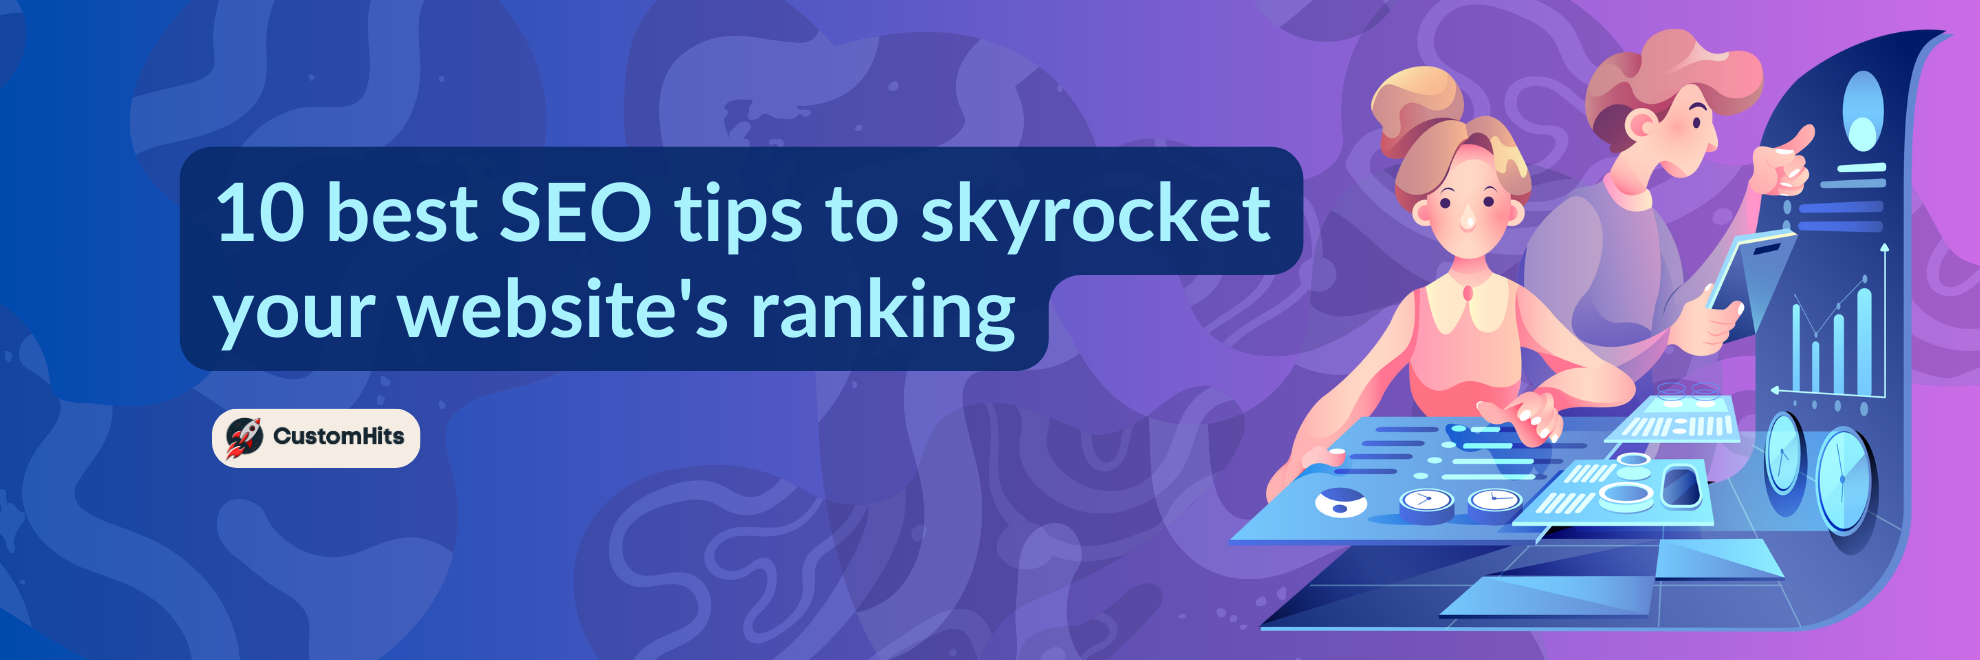 10 best SEO tips to skyrocket your website's ranking